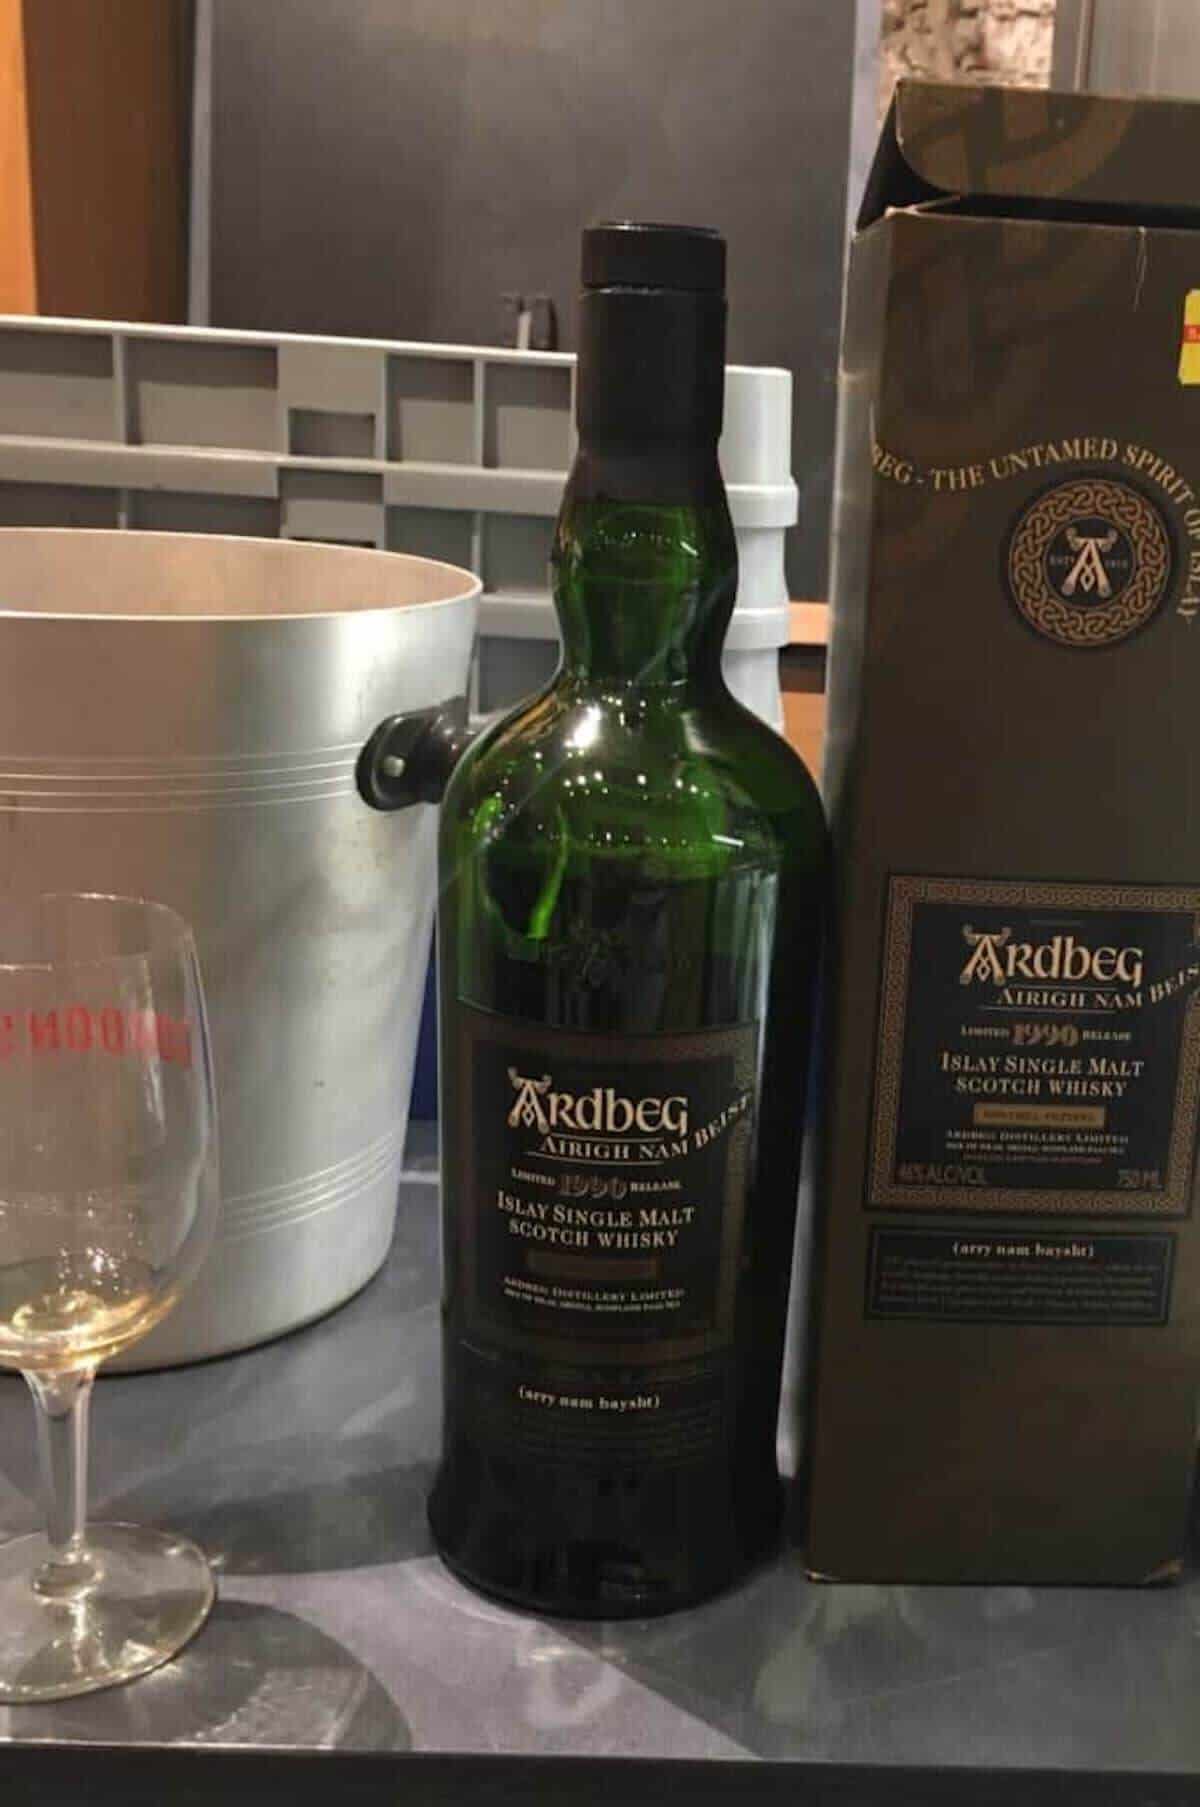 Ardbeg Airigh Nam Beist bottle & box next to a poured glass.